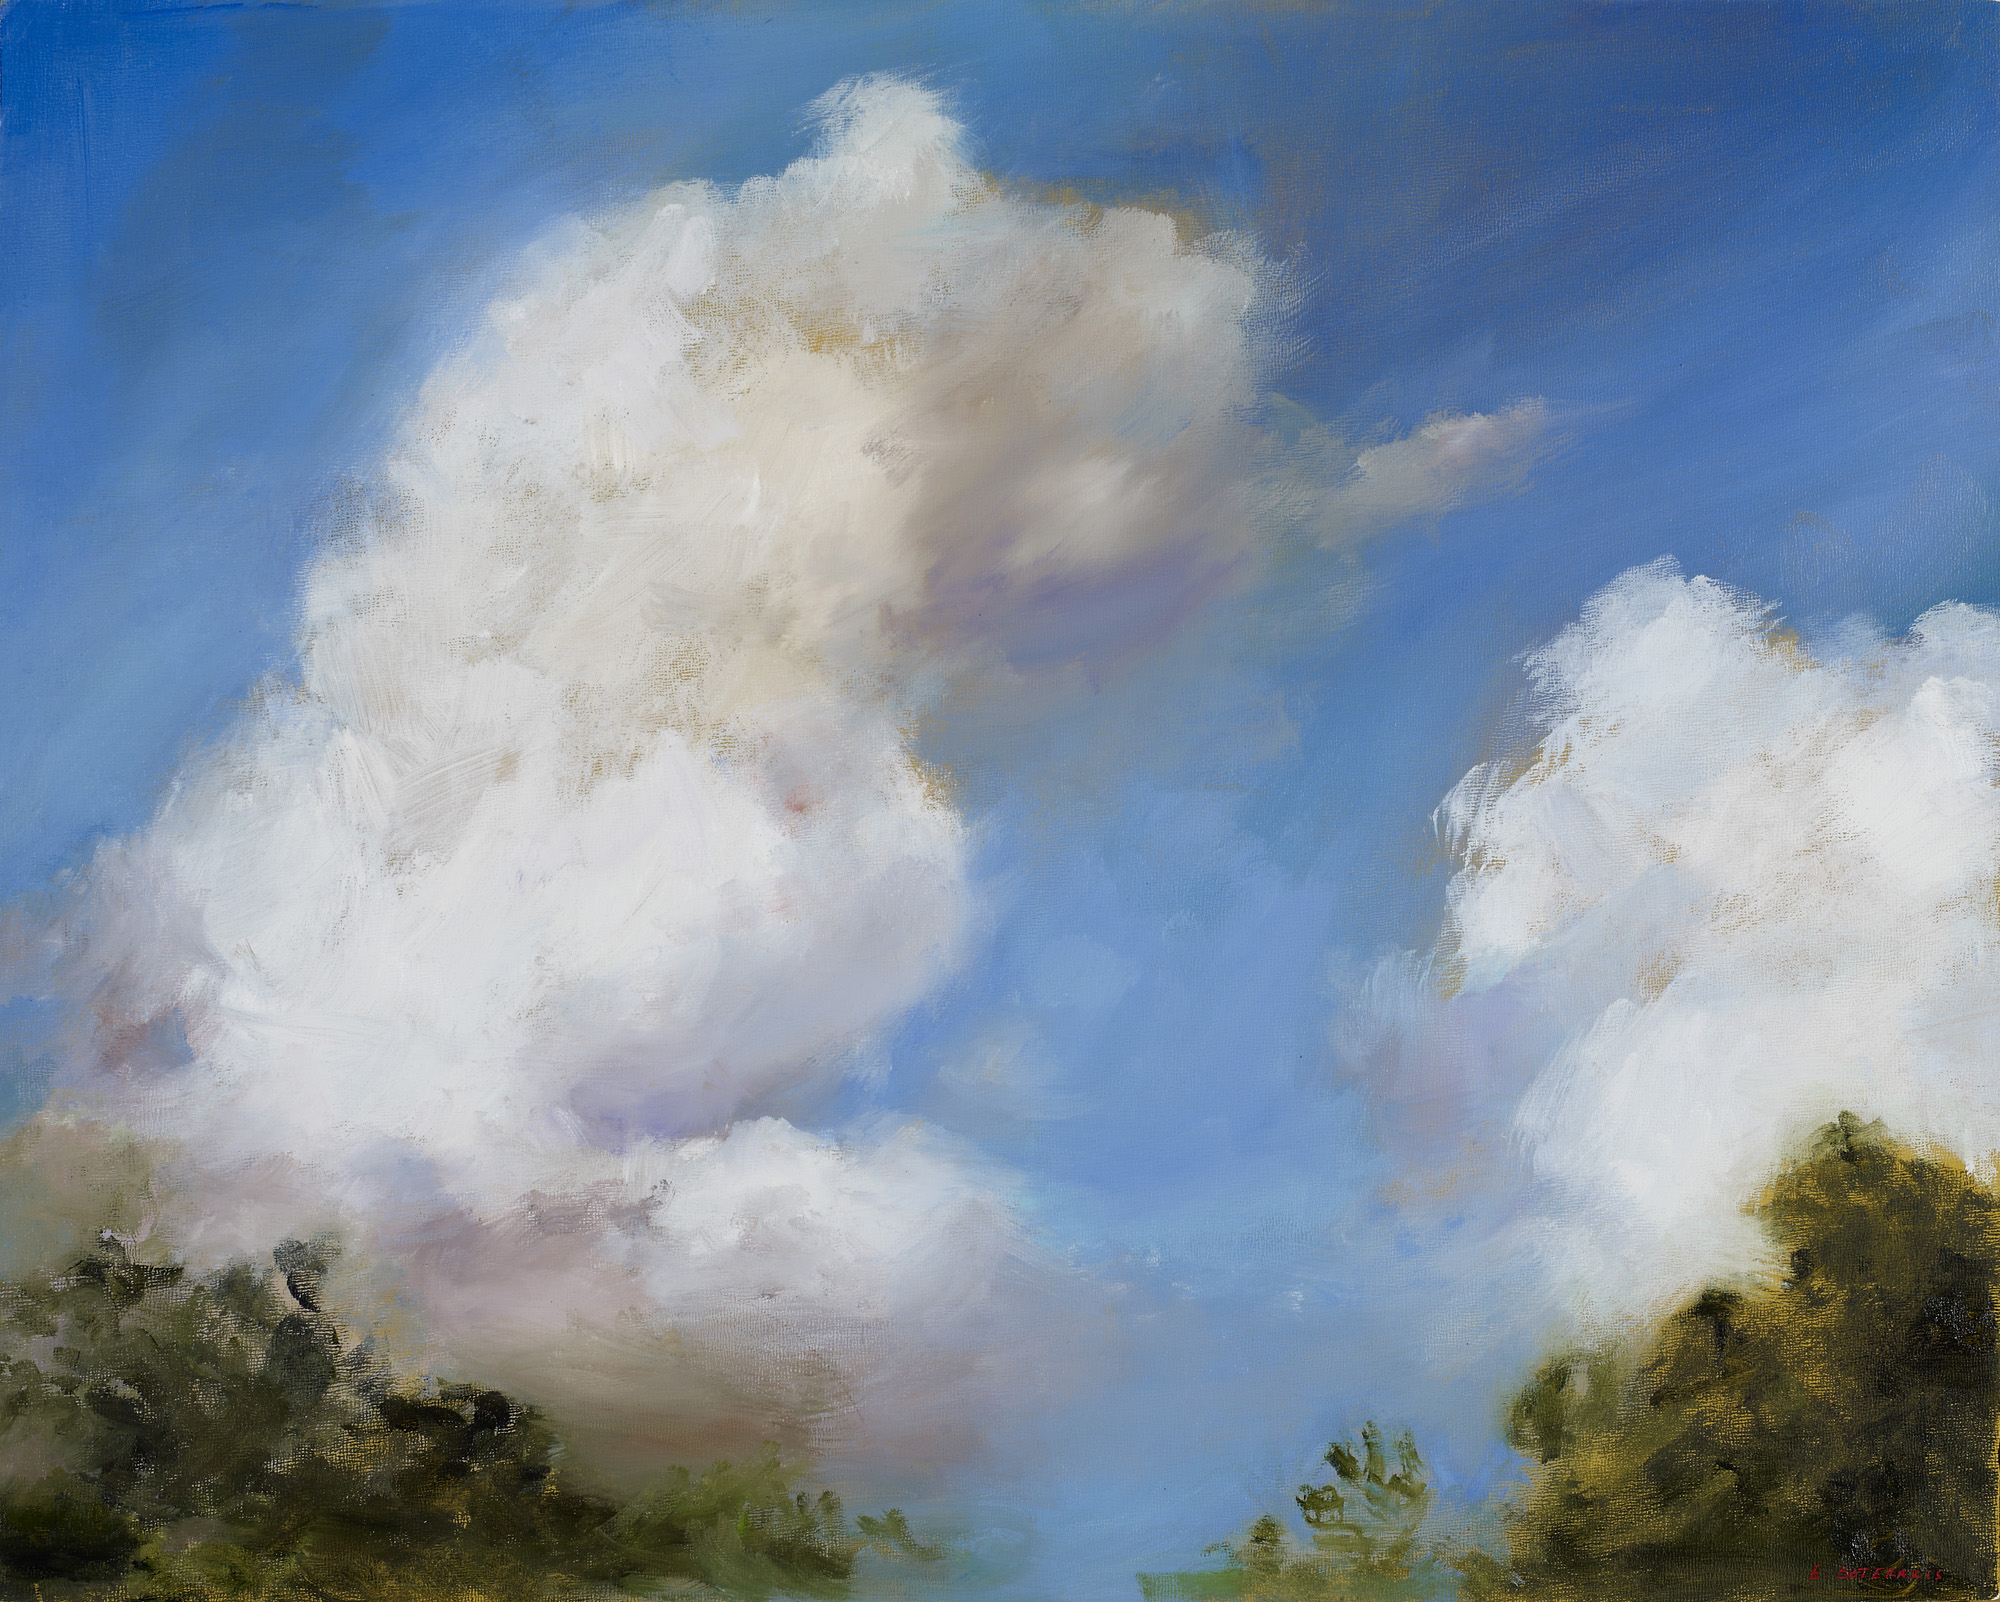  Ever Expanding Clouds Oil on panel 16” x 20” 